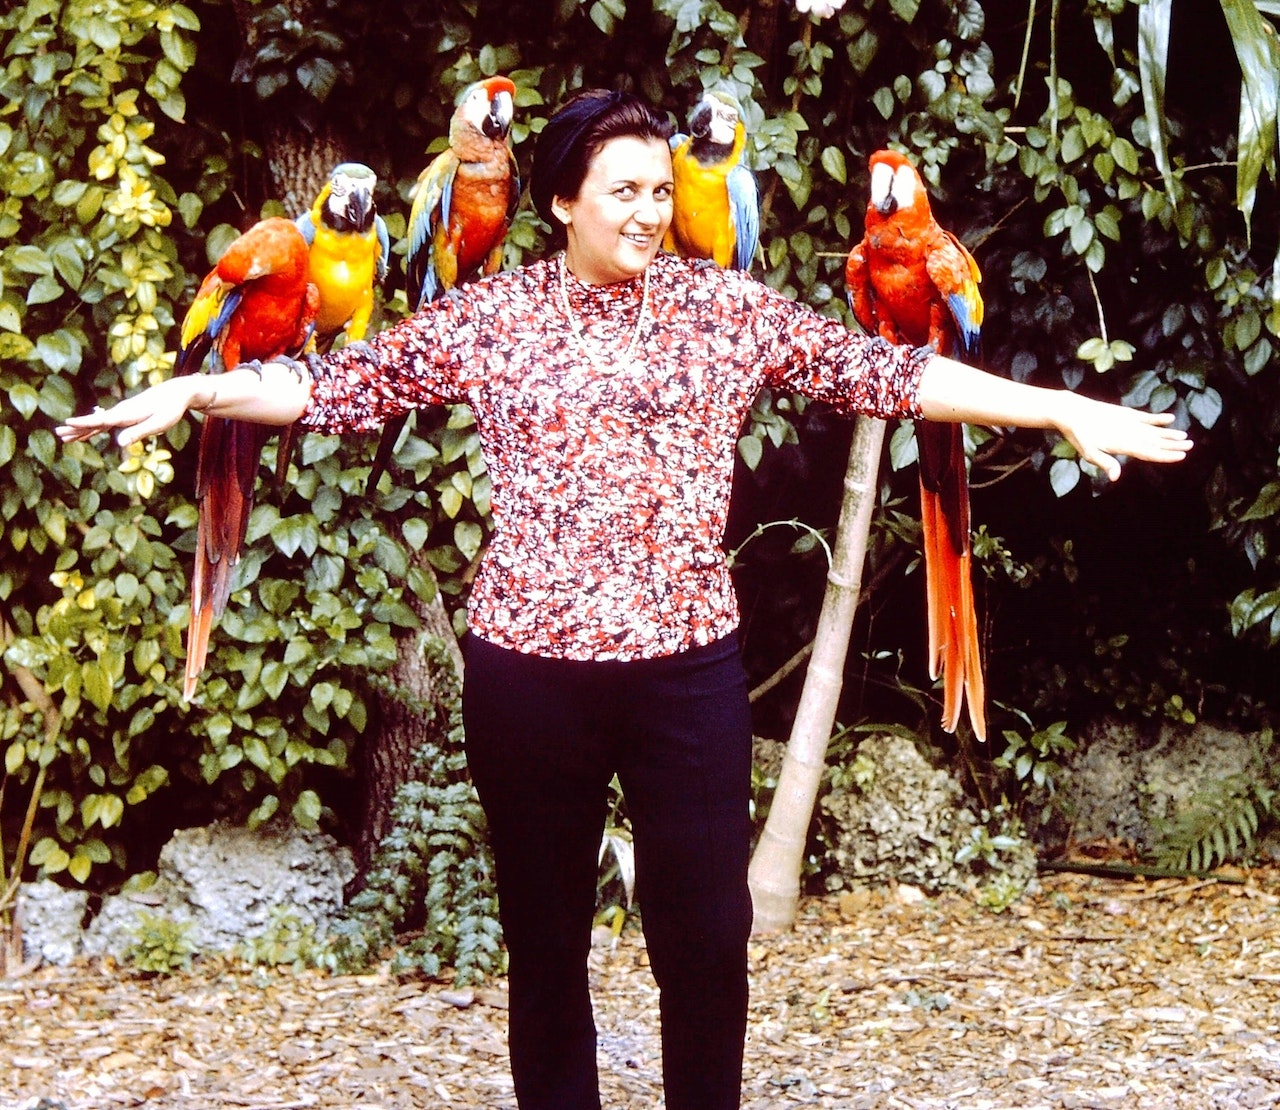 Exploring the Amazing World of Macaws, Cockatoos and Toucans, a woman with four macaws on her arms